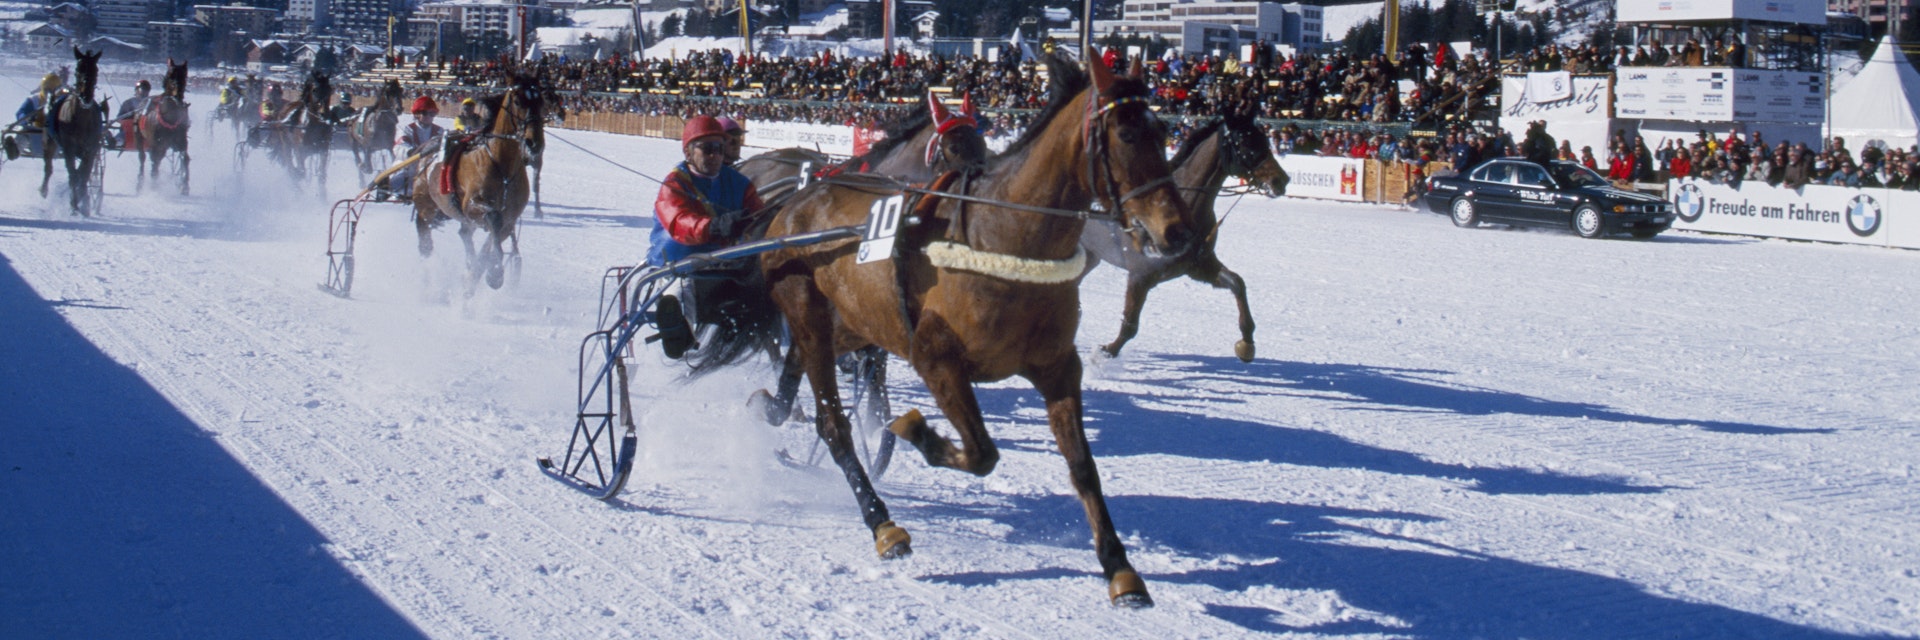 Switzerland, St Moritz, White Turf race meeting. A trotting race with jockeys driving horse-drawn sleighs on the frozen lake at St Moritz